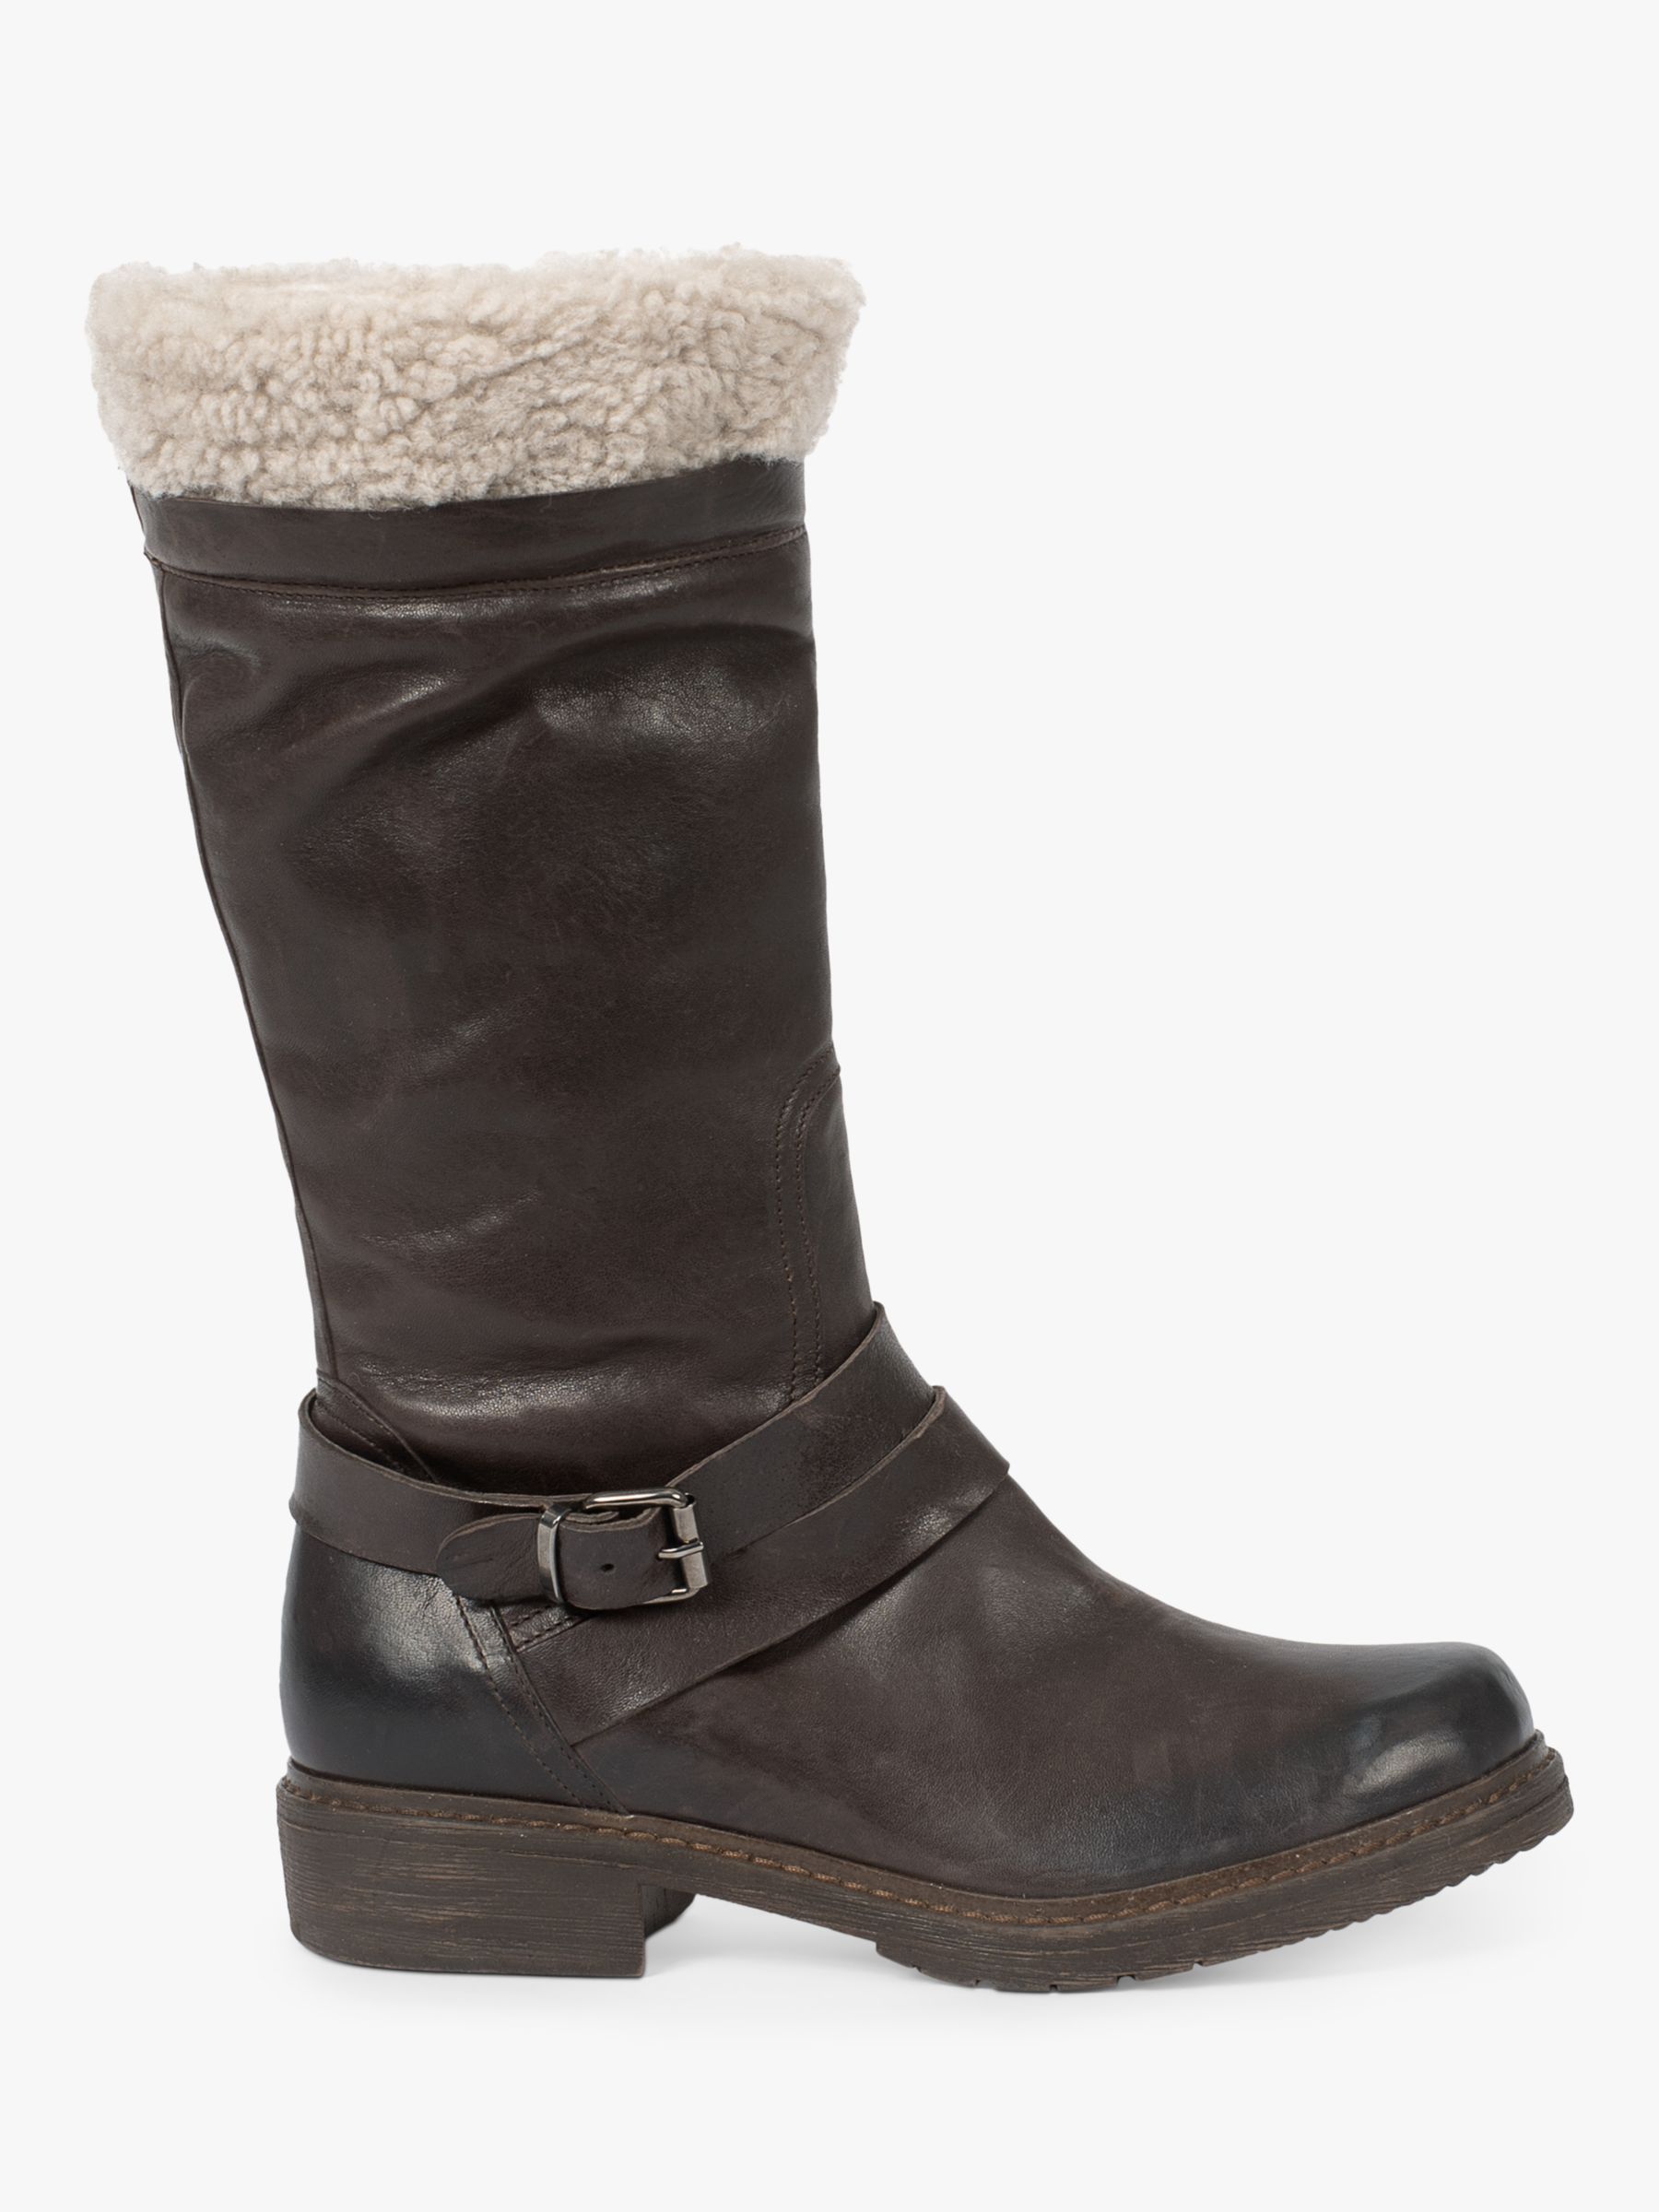 Celtic & Co. Sheepskin Trim Cuff Long Boots, Tanners Brown, 3